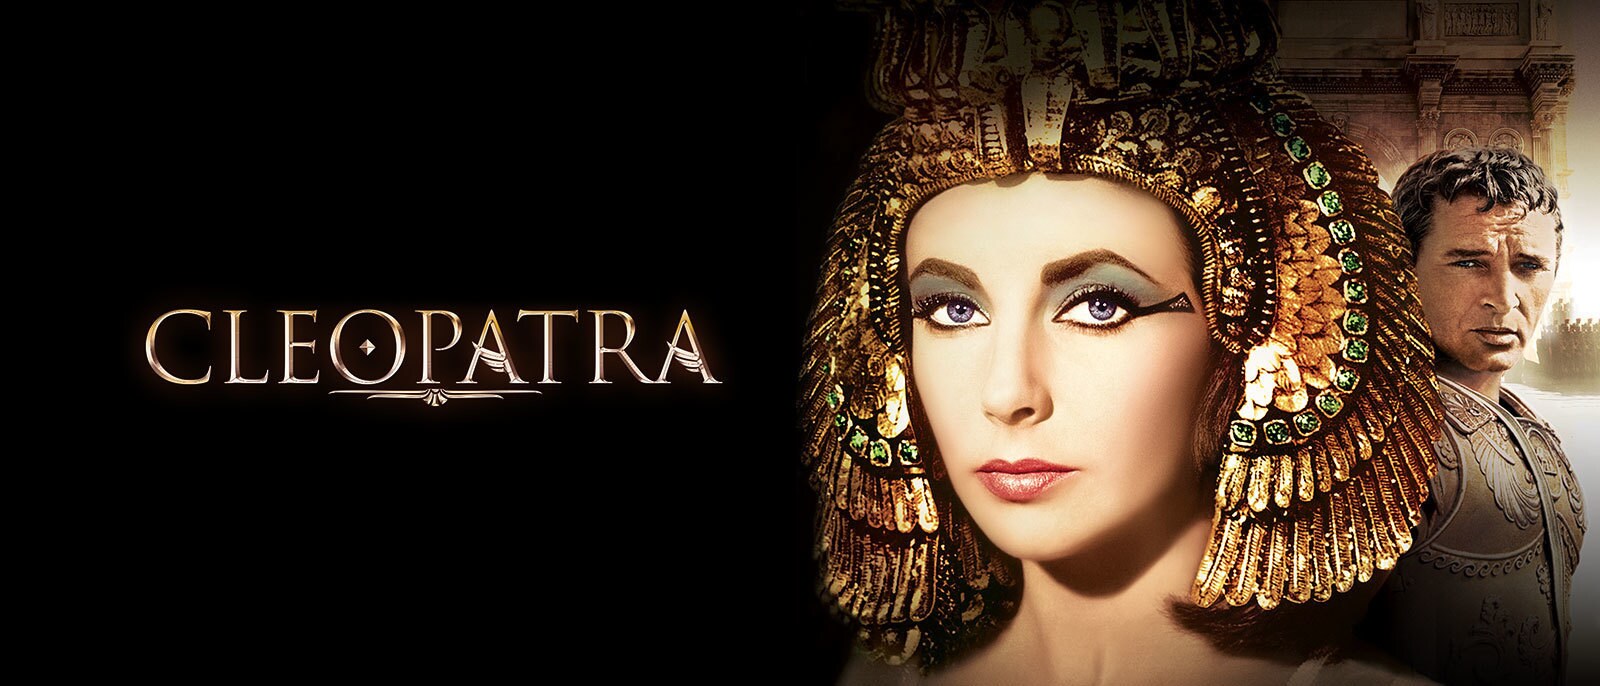 42-facts-about-the-movie-cleopatra